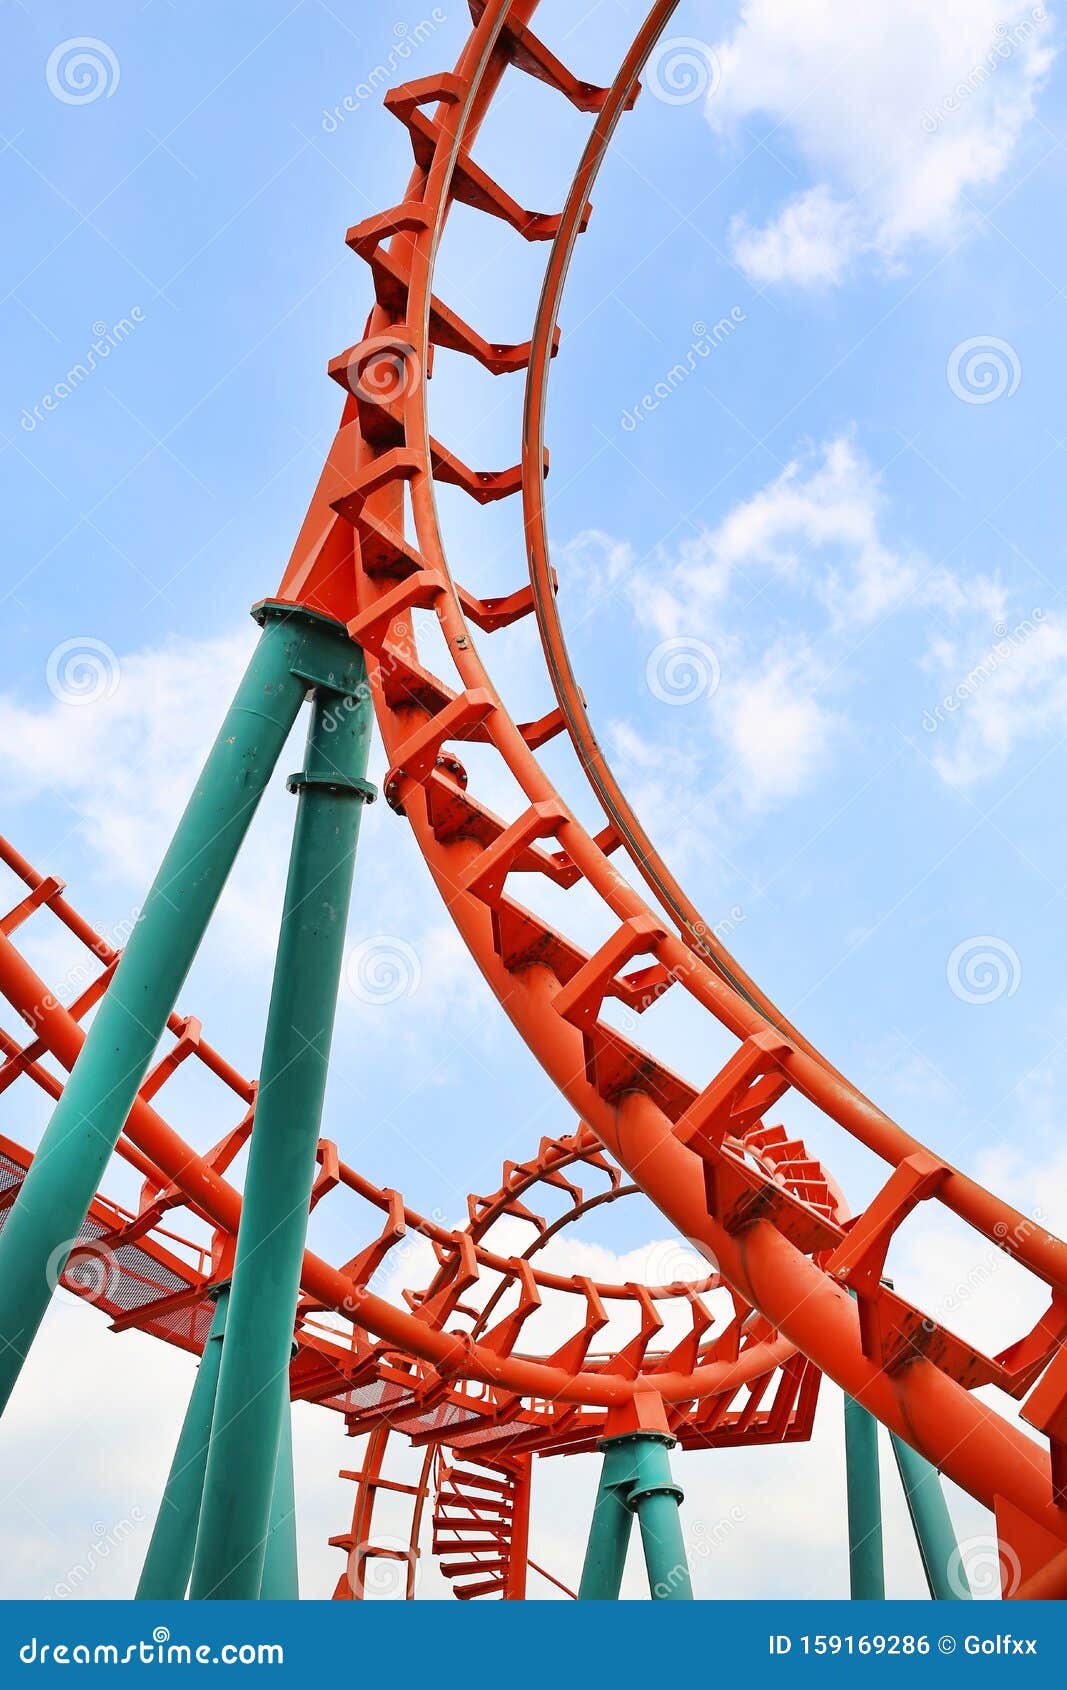 Roller Coaster Against Cloud Sky Background Stock Photo Image Of Curves Cloud